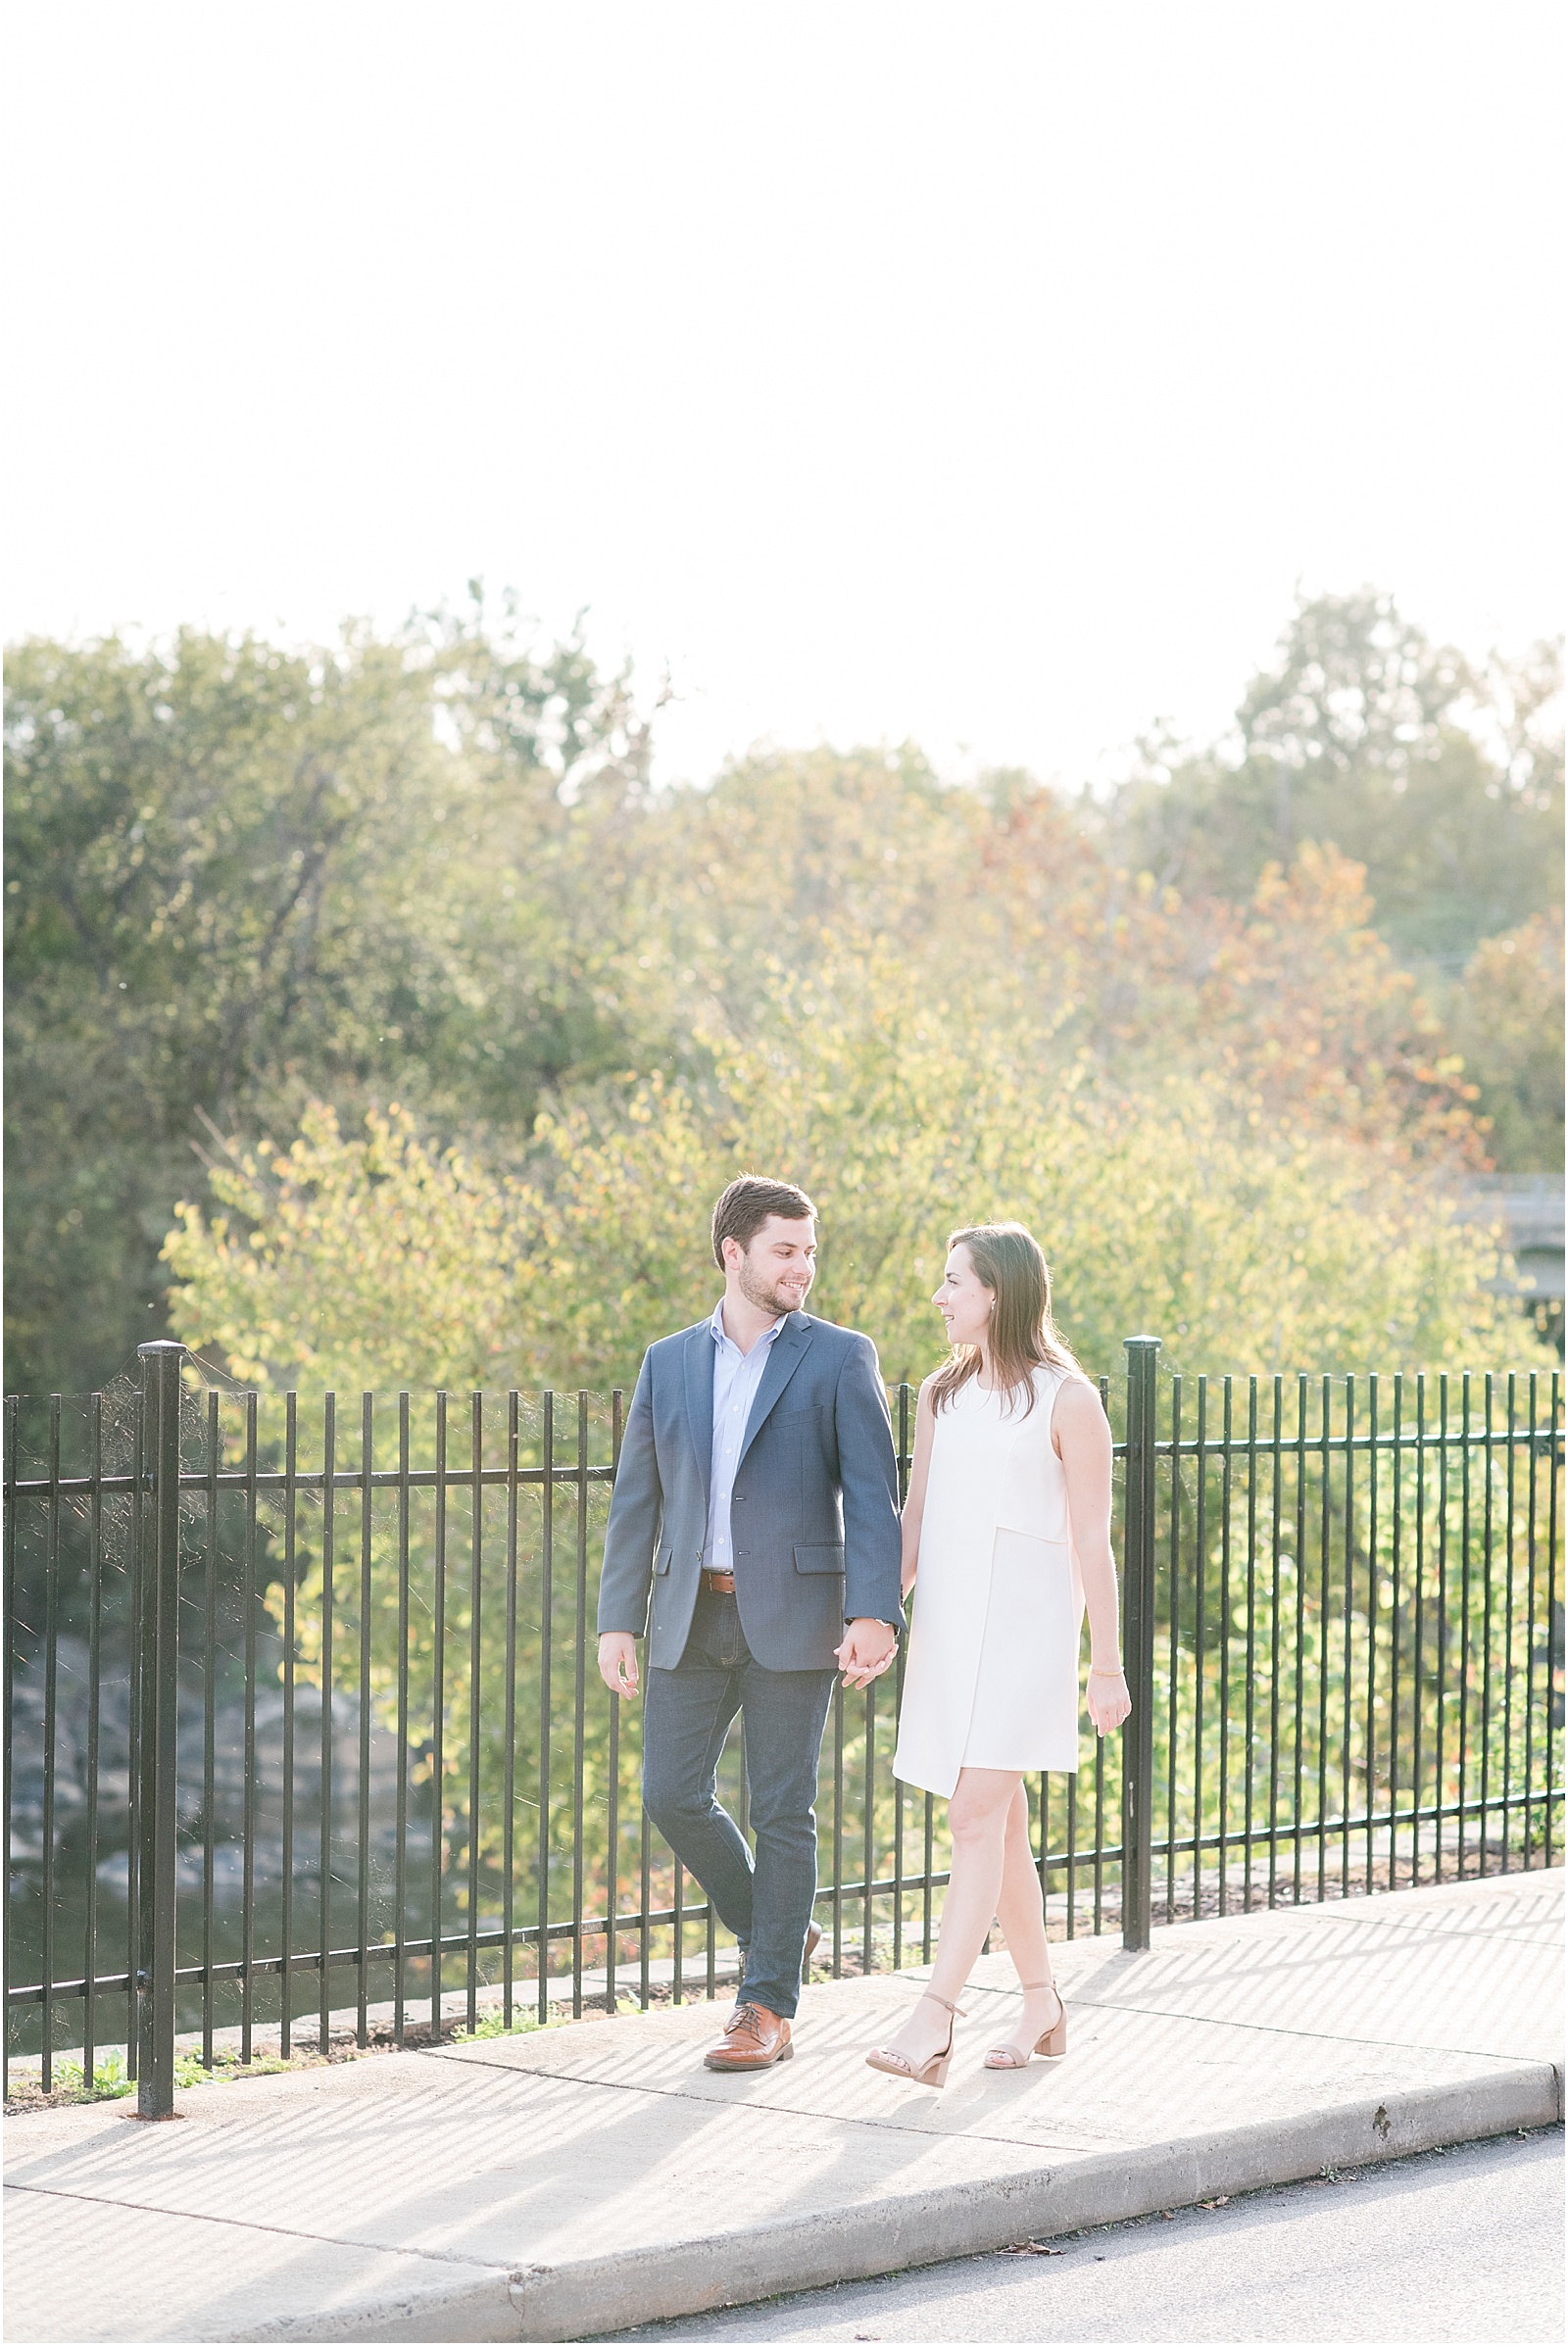 michelle and sara photography, saxapahaw, the rivermill lofts, chic engagement outfit, chic engagement session, saxapahaw engagement session, navy blue suit, brick arched backgroung, north carolina engagement, nc engagement, nc engagement photographer, 2018 bride, 2018 wedding